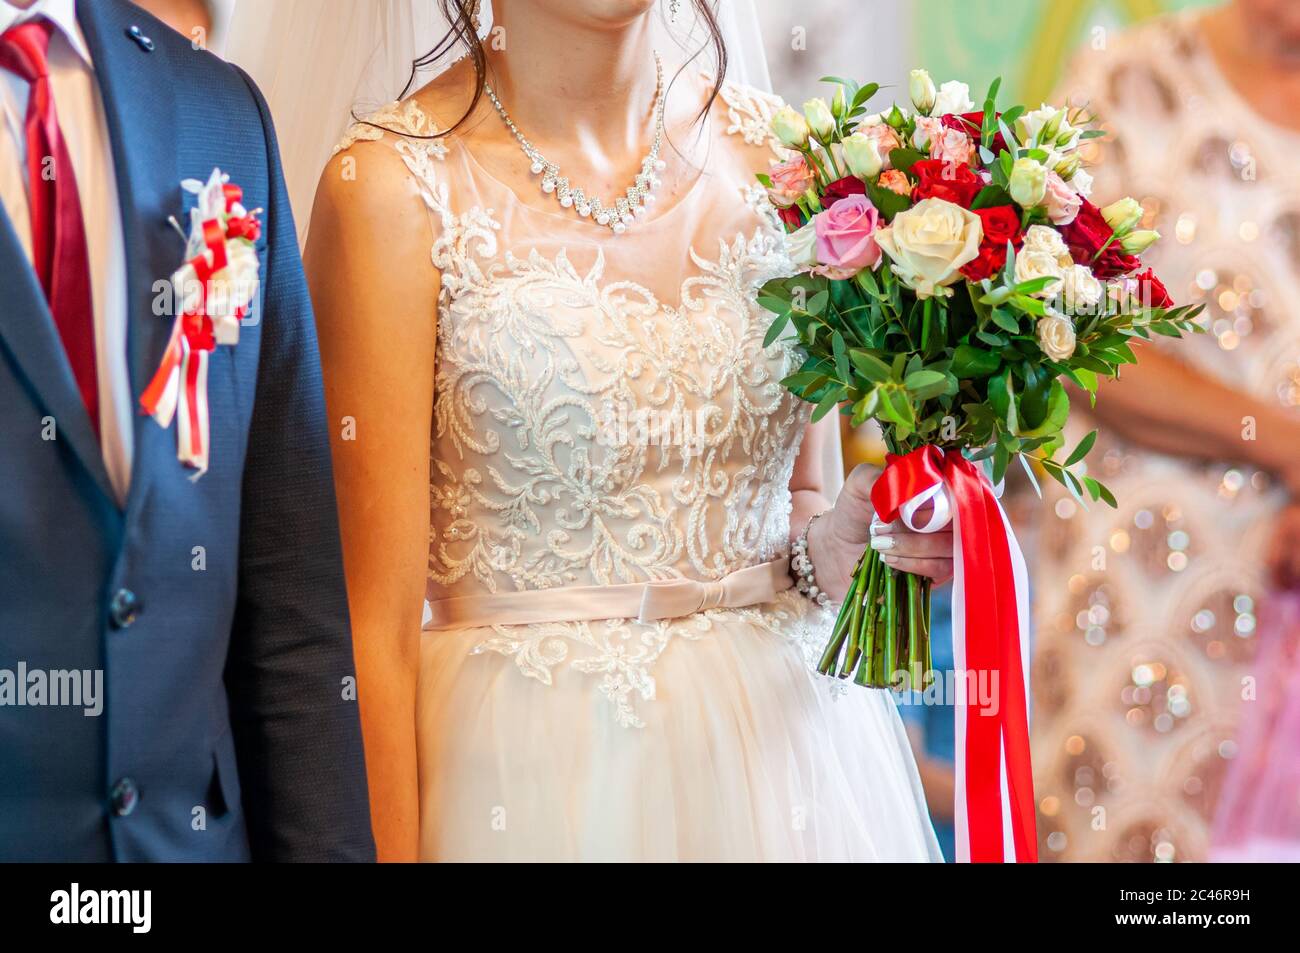 Bride holding colorfull flower bouquet in the hand Stock Photo